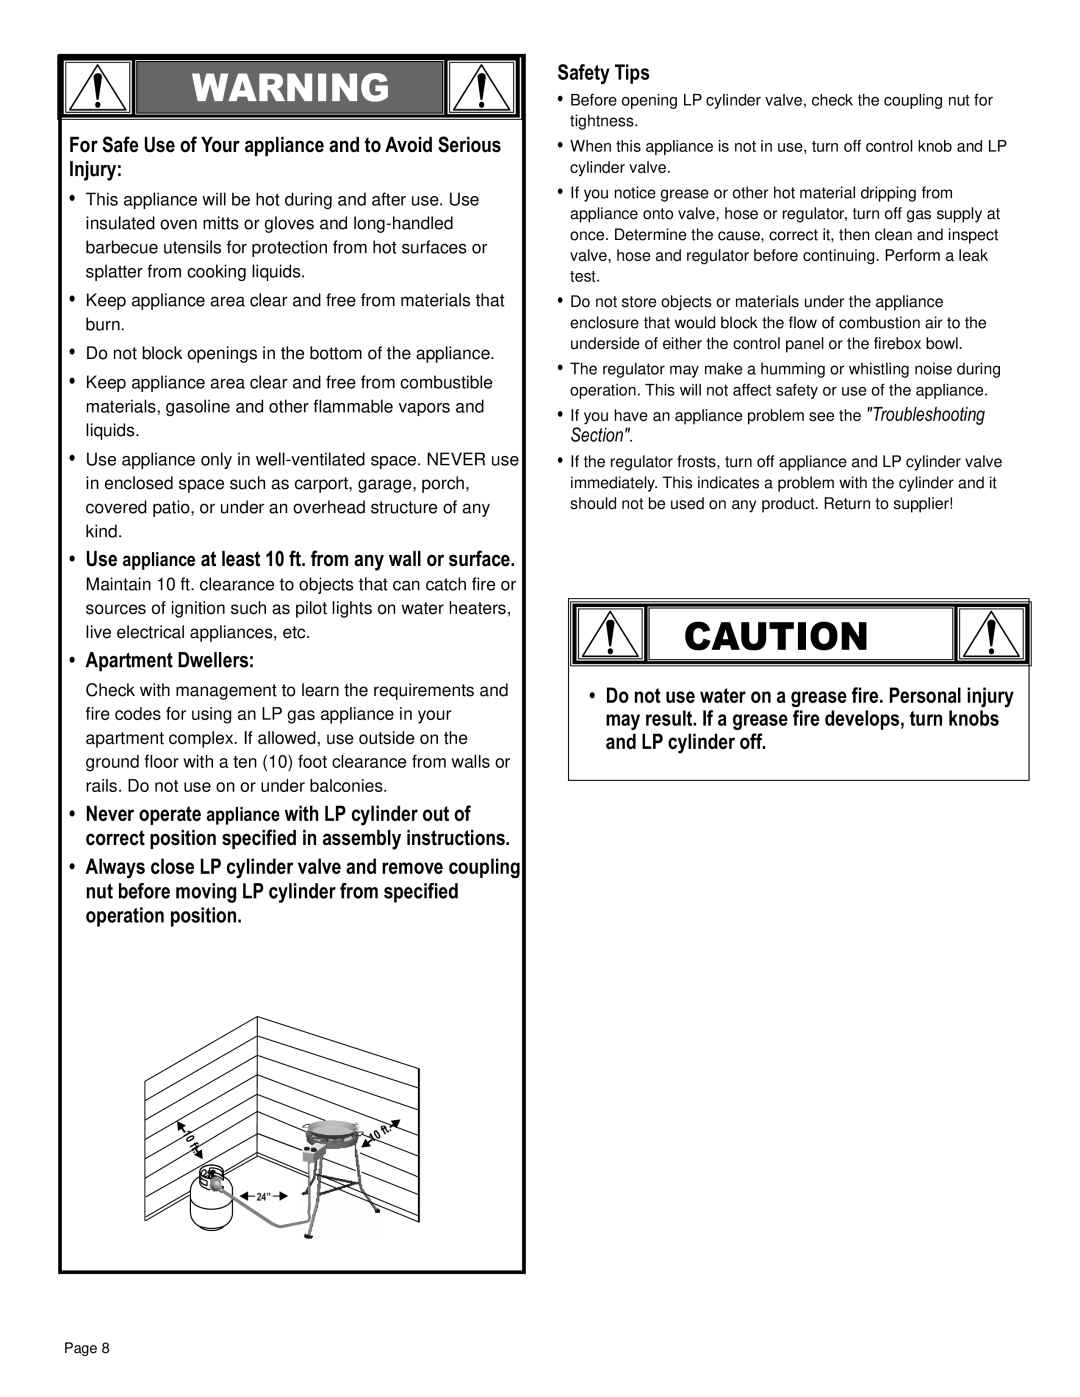 Char-Broil 11101706 manual For Safe Use of Your appliance and to Avoid Serious Injury, Apartment Dwellers, Safety Tips 